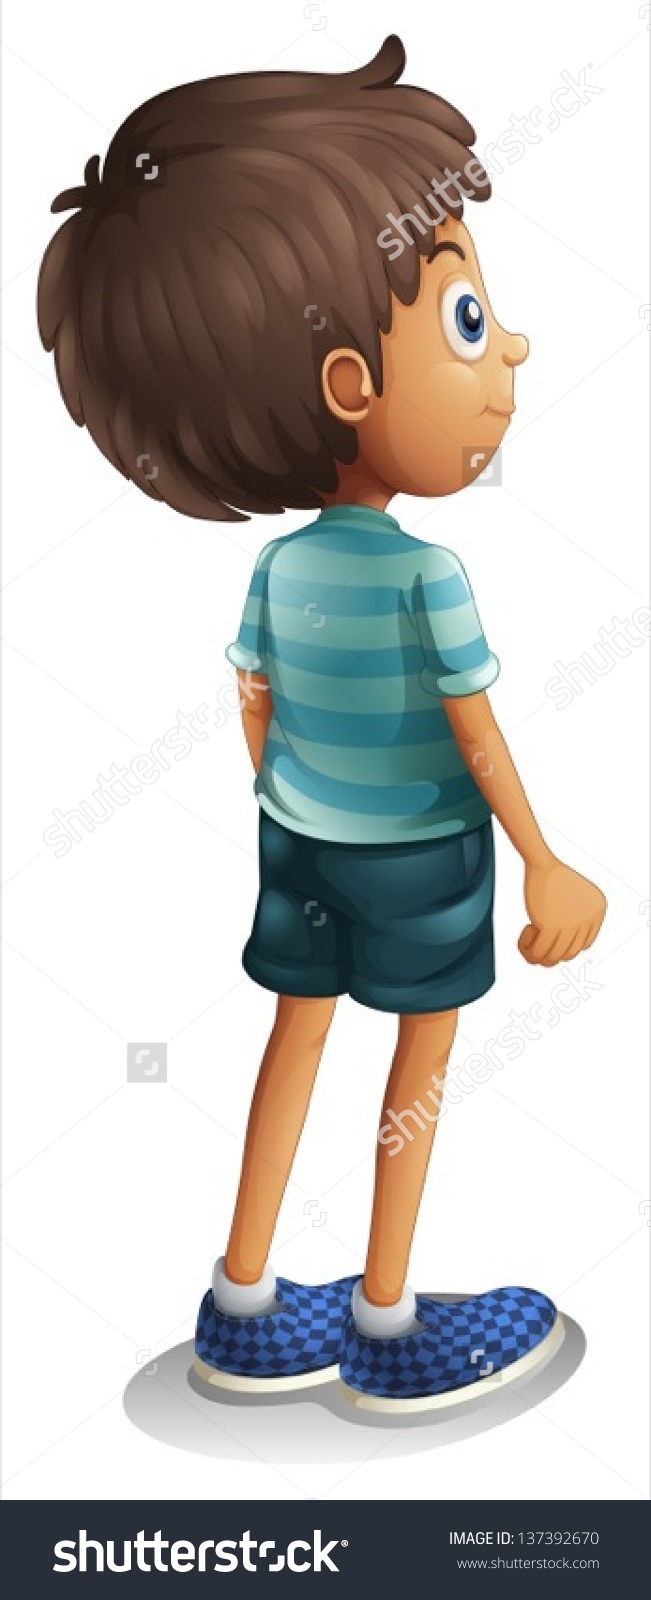 Illustration Back View Young Boy On Stock Vector 137392670.